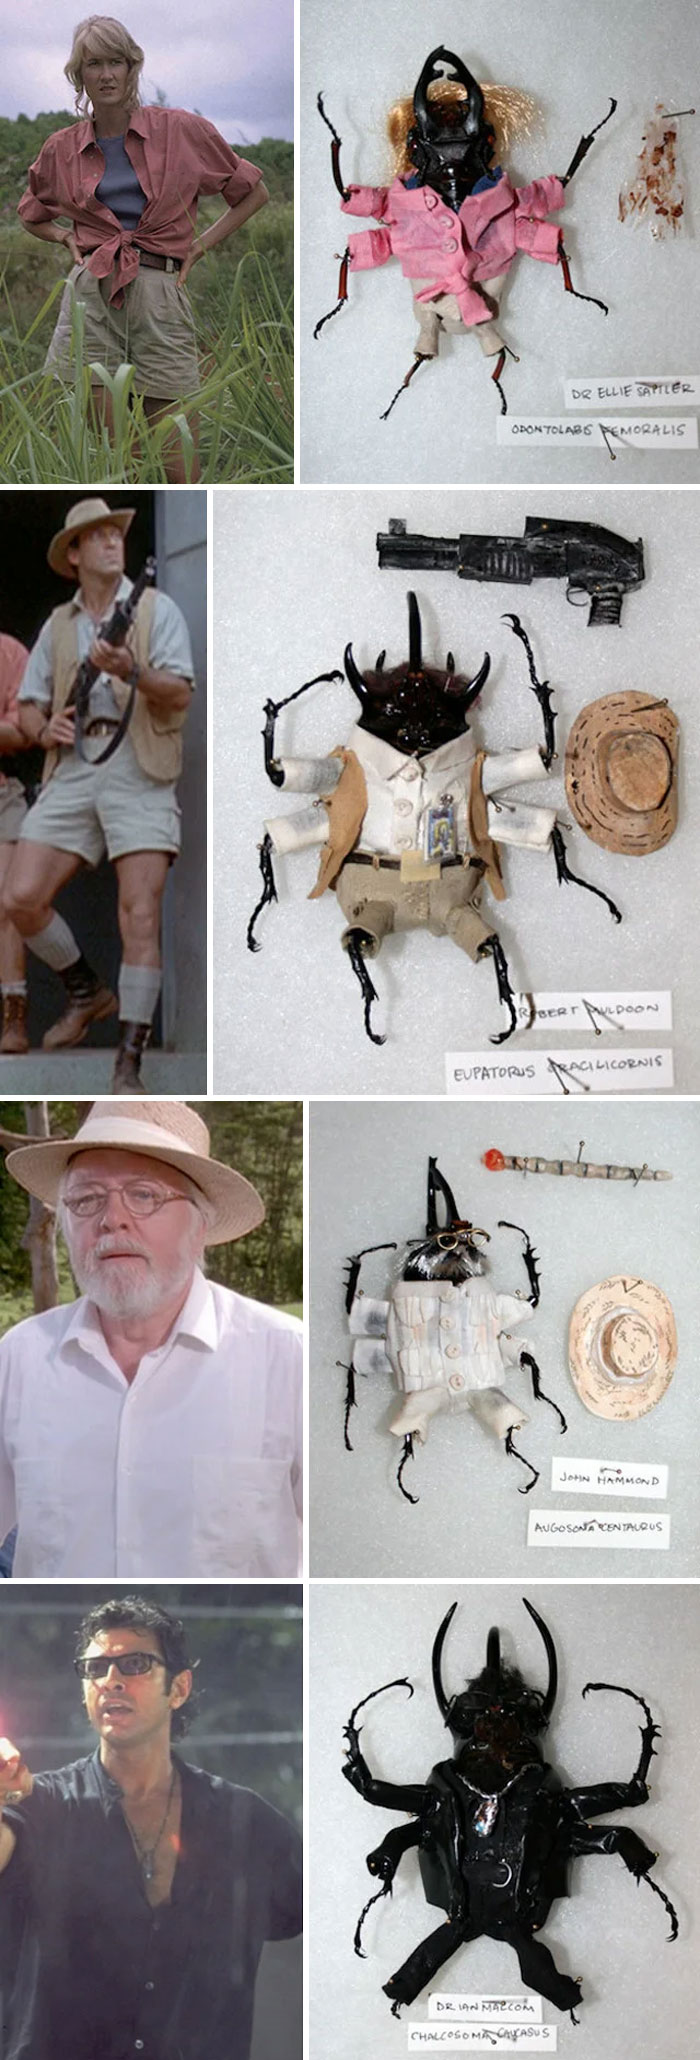 Someone Was Selling Dead Beetles Dressed Up As Jurassic Park Characters On Etsy